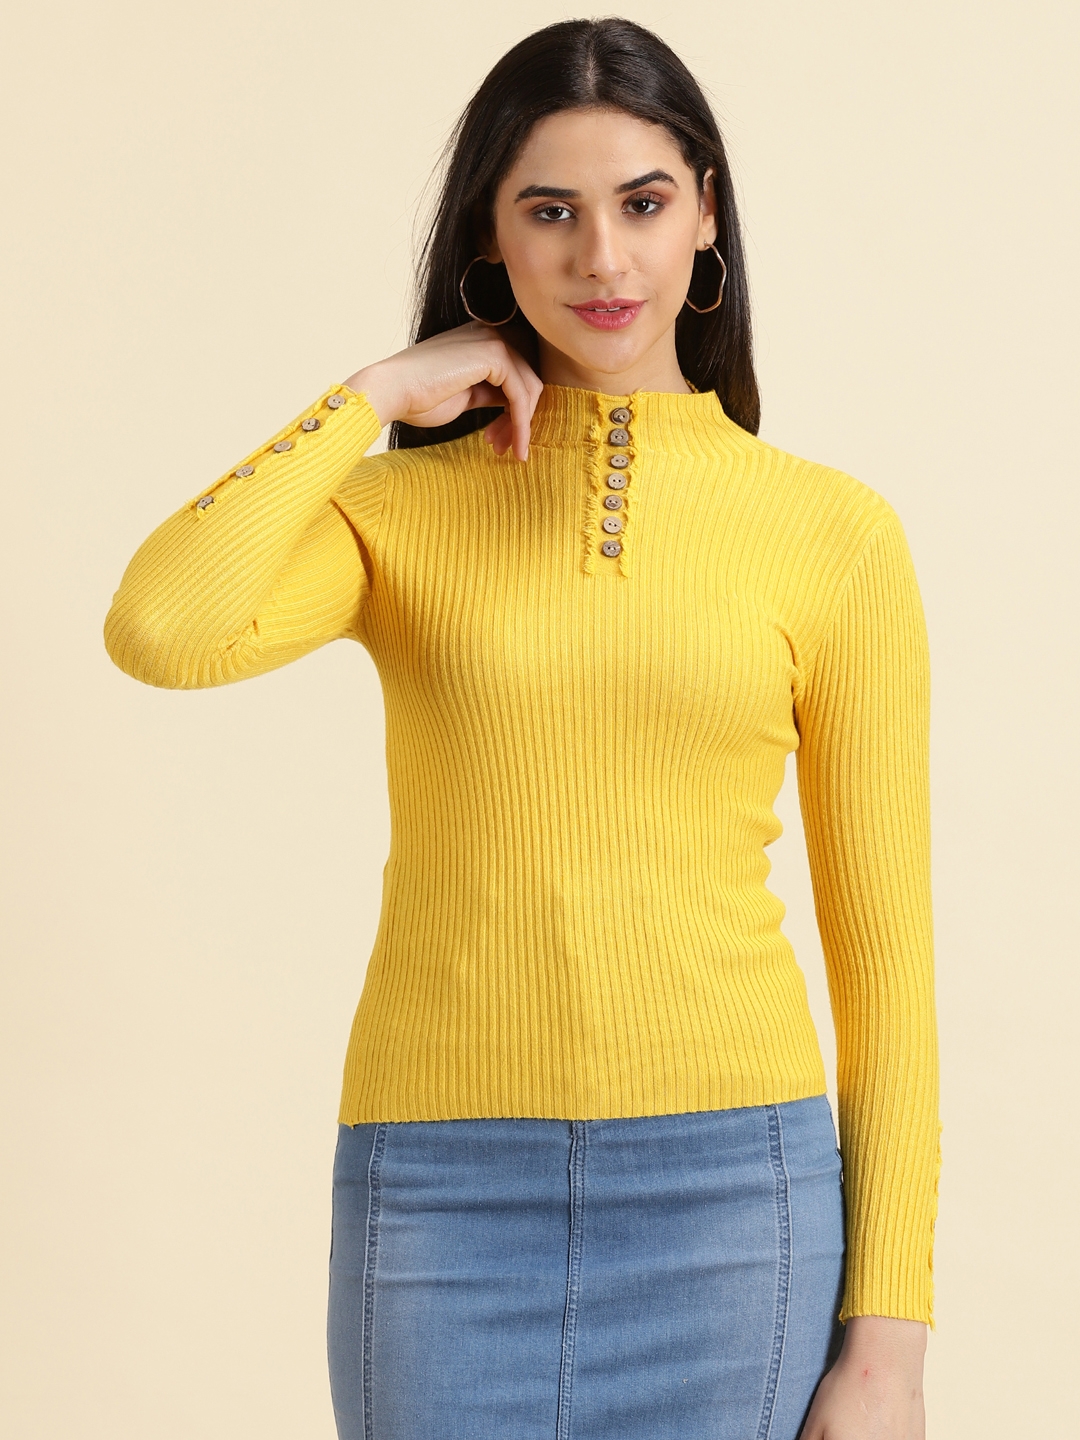 Showoff | SHOWOFF Women's High Neck Solid Yellow Fitted Regular Top 1